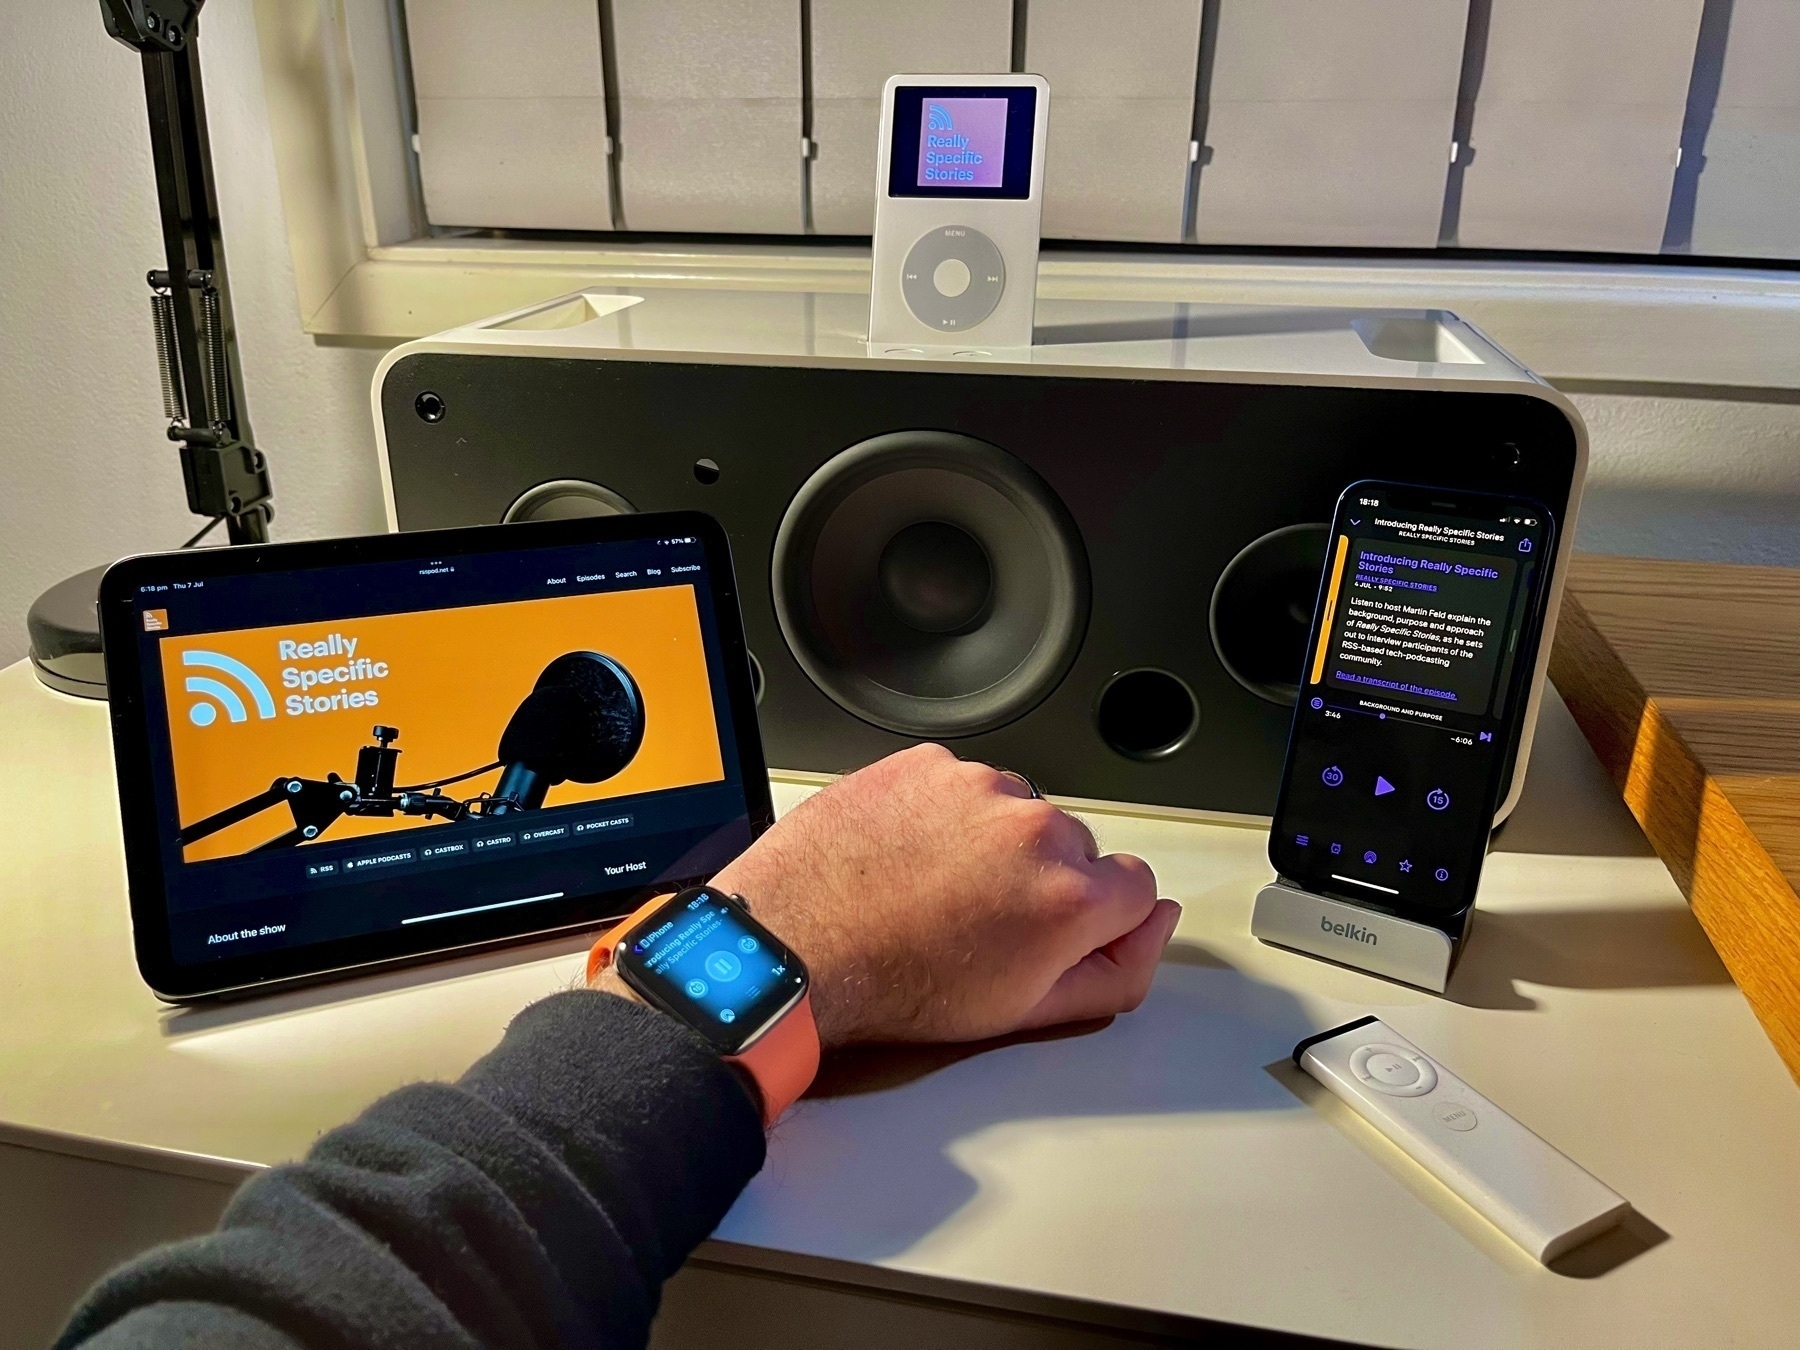 Podcast artwork and apps displayed across an Apple Watch, iPad mini (6th gen.), iPhone 12 mini and white iPod Video docked in an iPod Hi-Fi